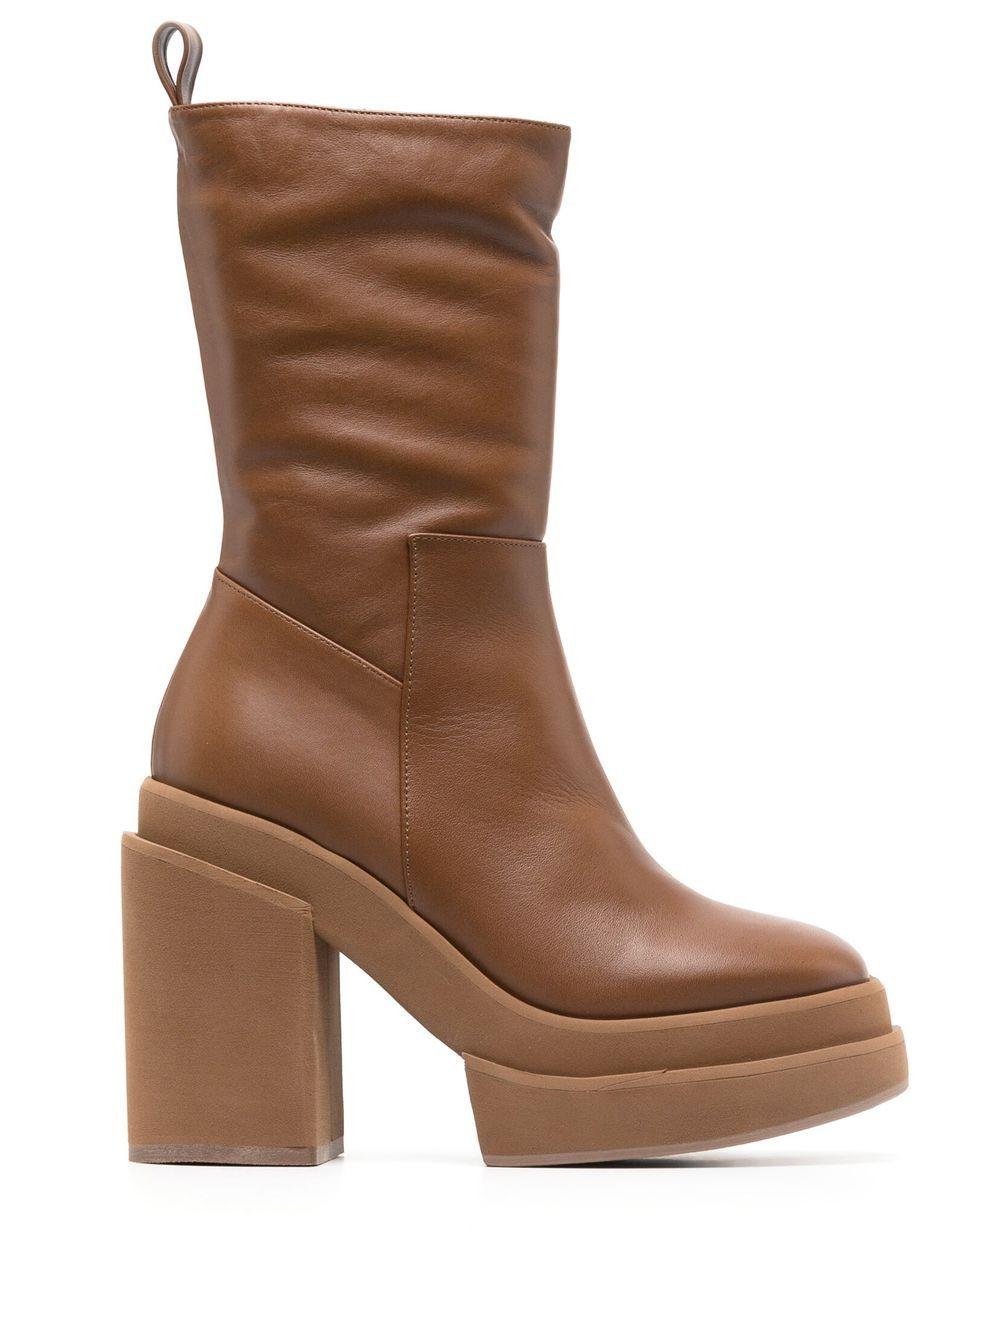 Paloma Barceló 120mm Melissa Iris Leather Boots in Brown | Lyst